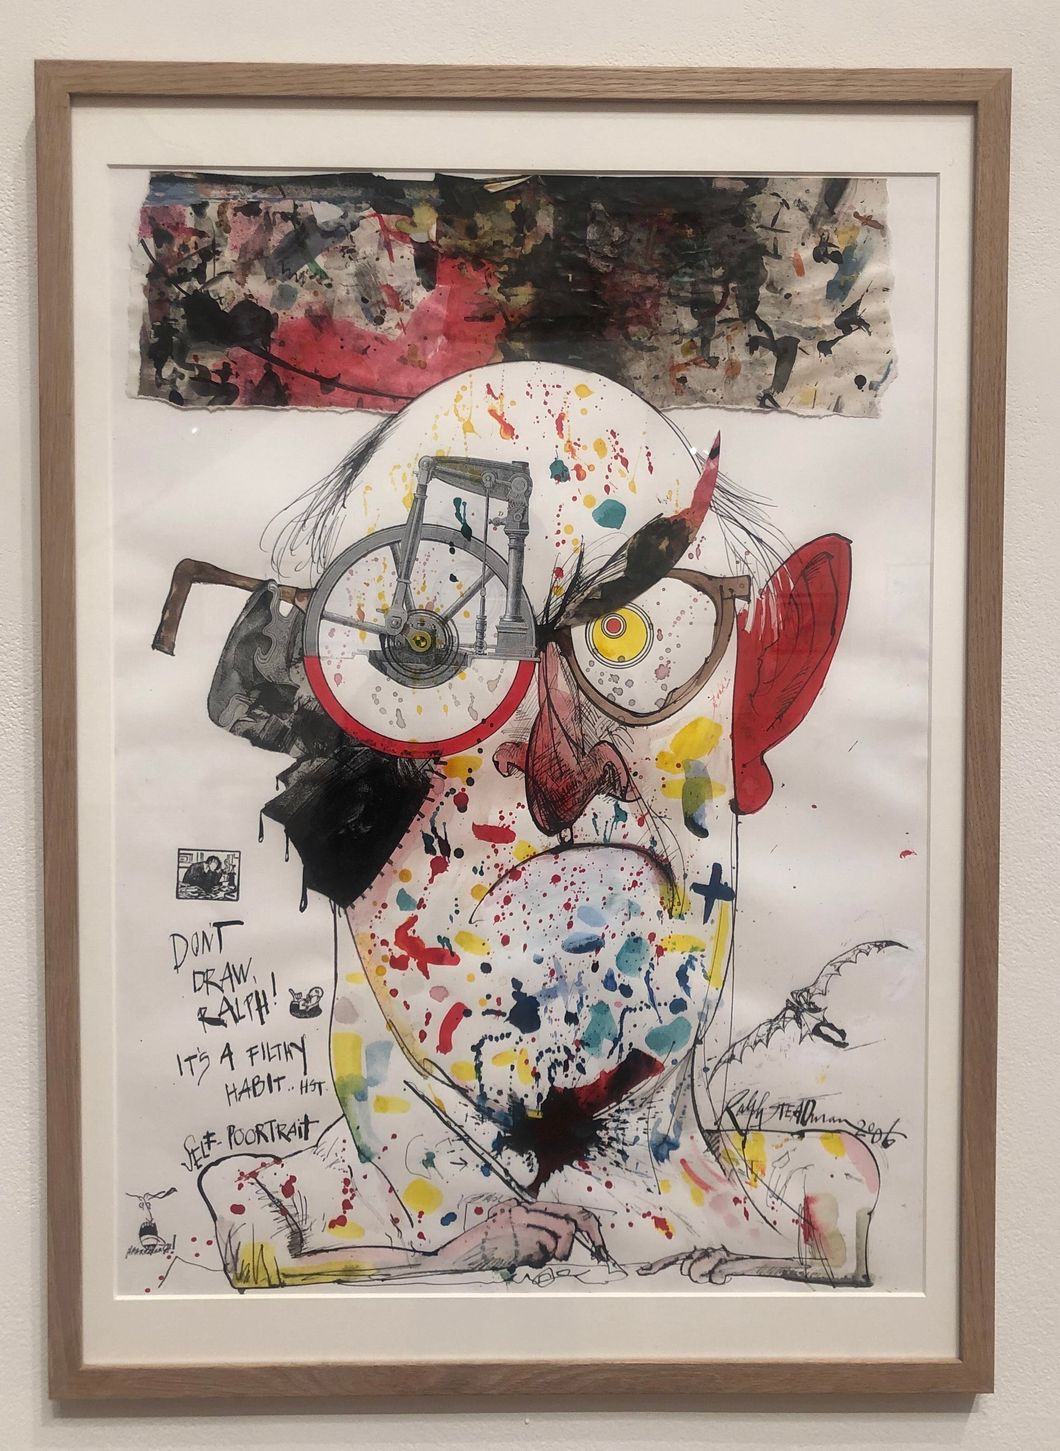 Ralph Steadman’s “Self-Poortrait” Portrays The Importance Of Self-Awareness In Art And In Life